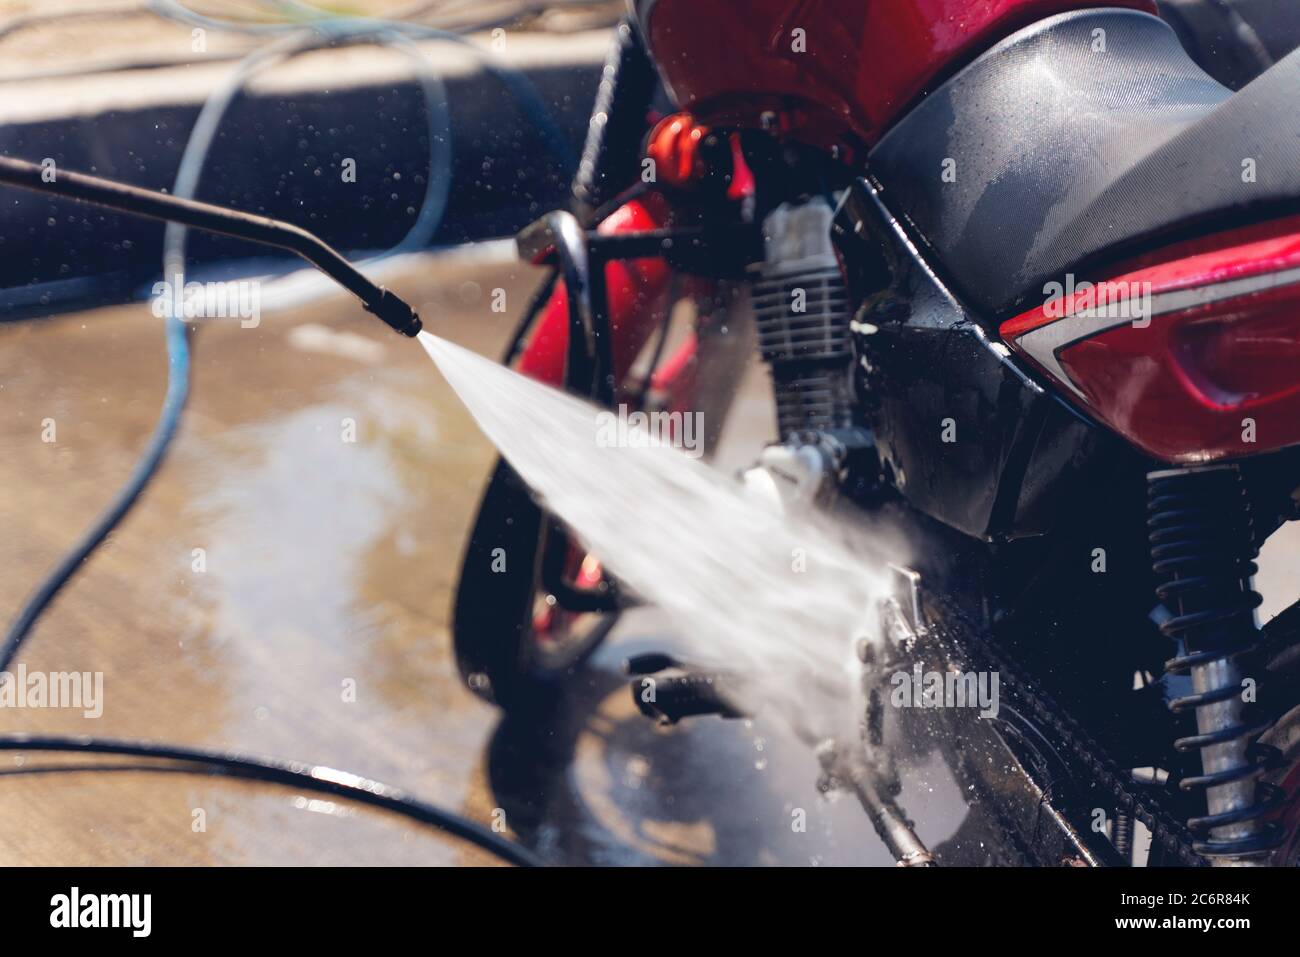 Motorcycle Car Wash Motorcycle Big Bike cleaning with foam injection Make  more clean. Bike rider washing his motorcycle Stock Photo - Alamy